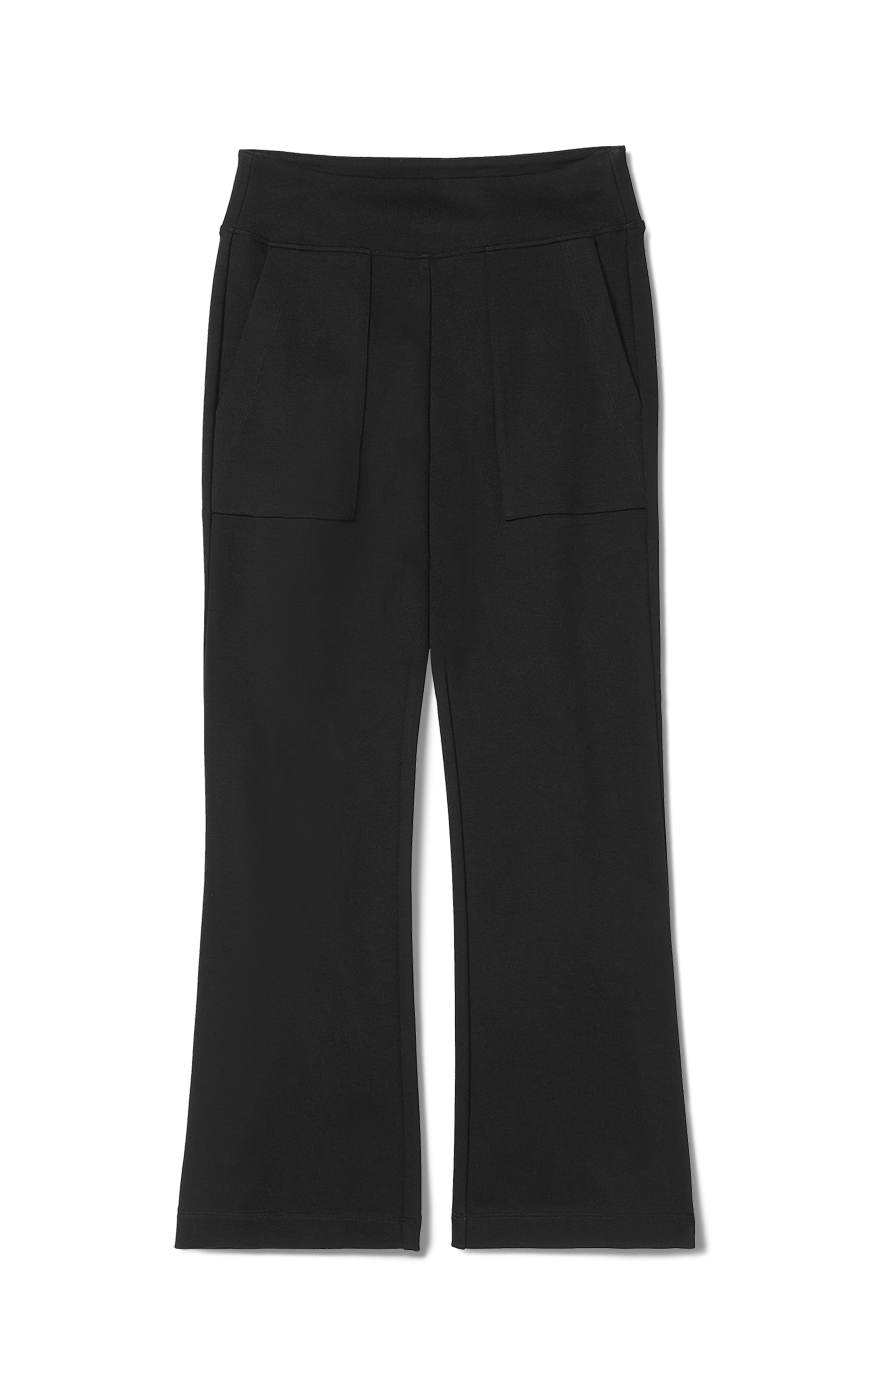 Black Flared High Rise Stretchy Pants